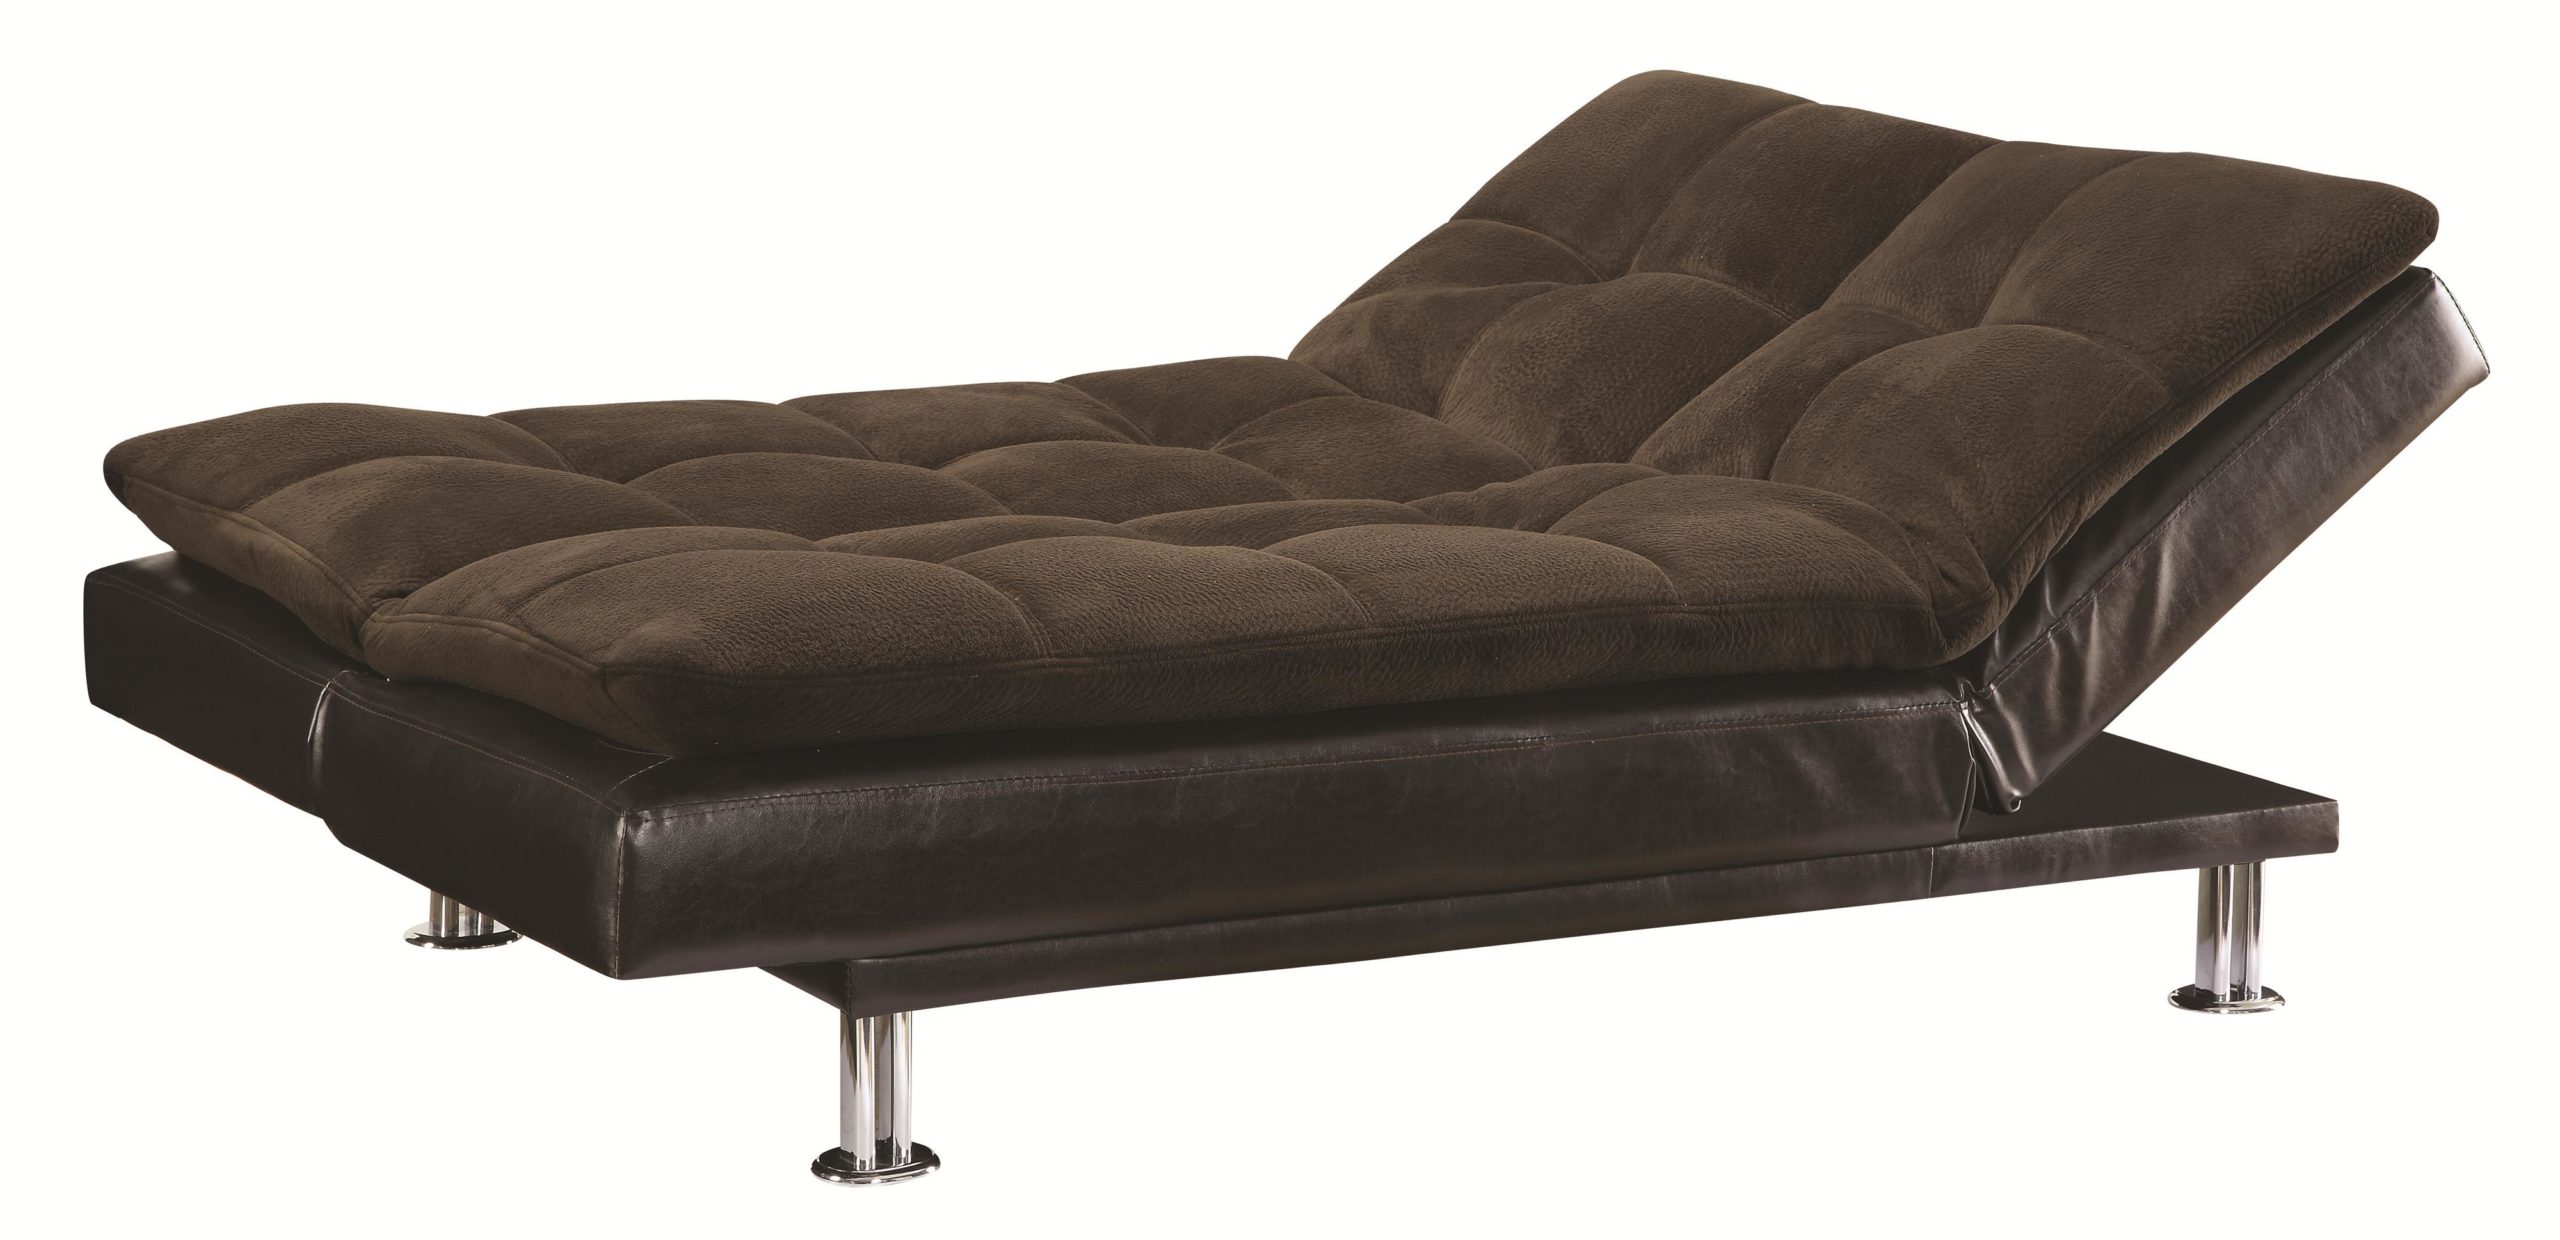 Millie Sofa Bed with Chrome Legs in pillow up position